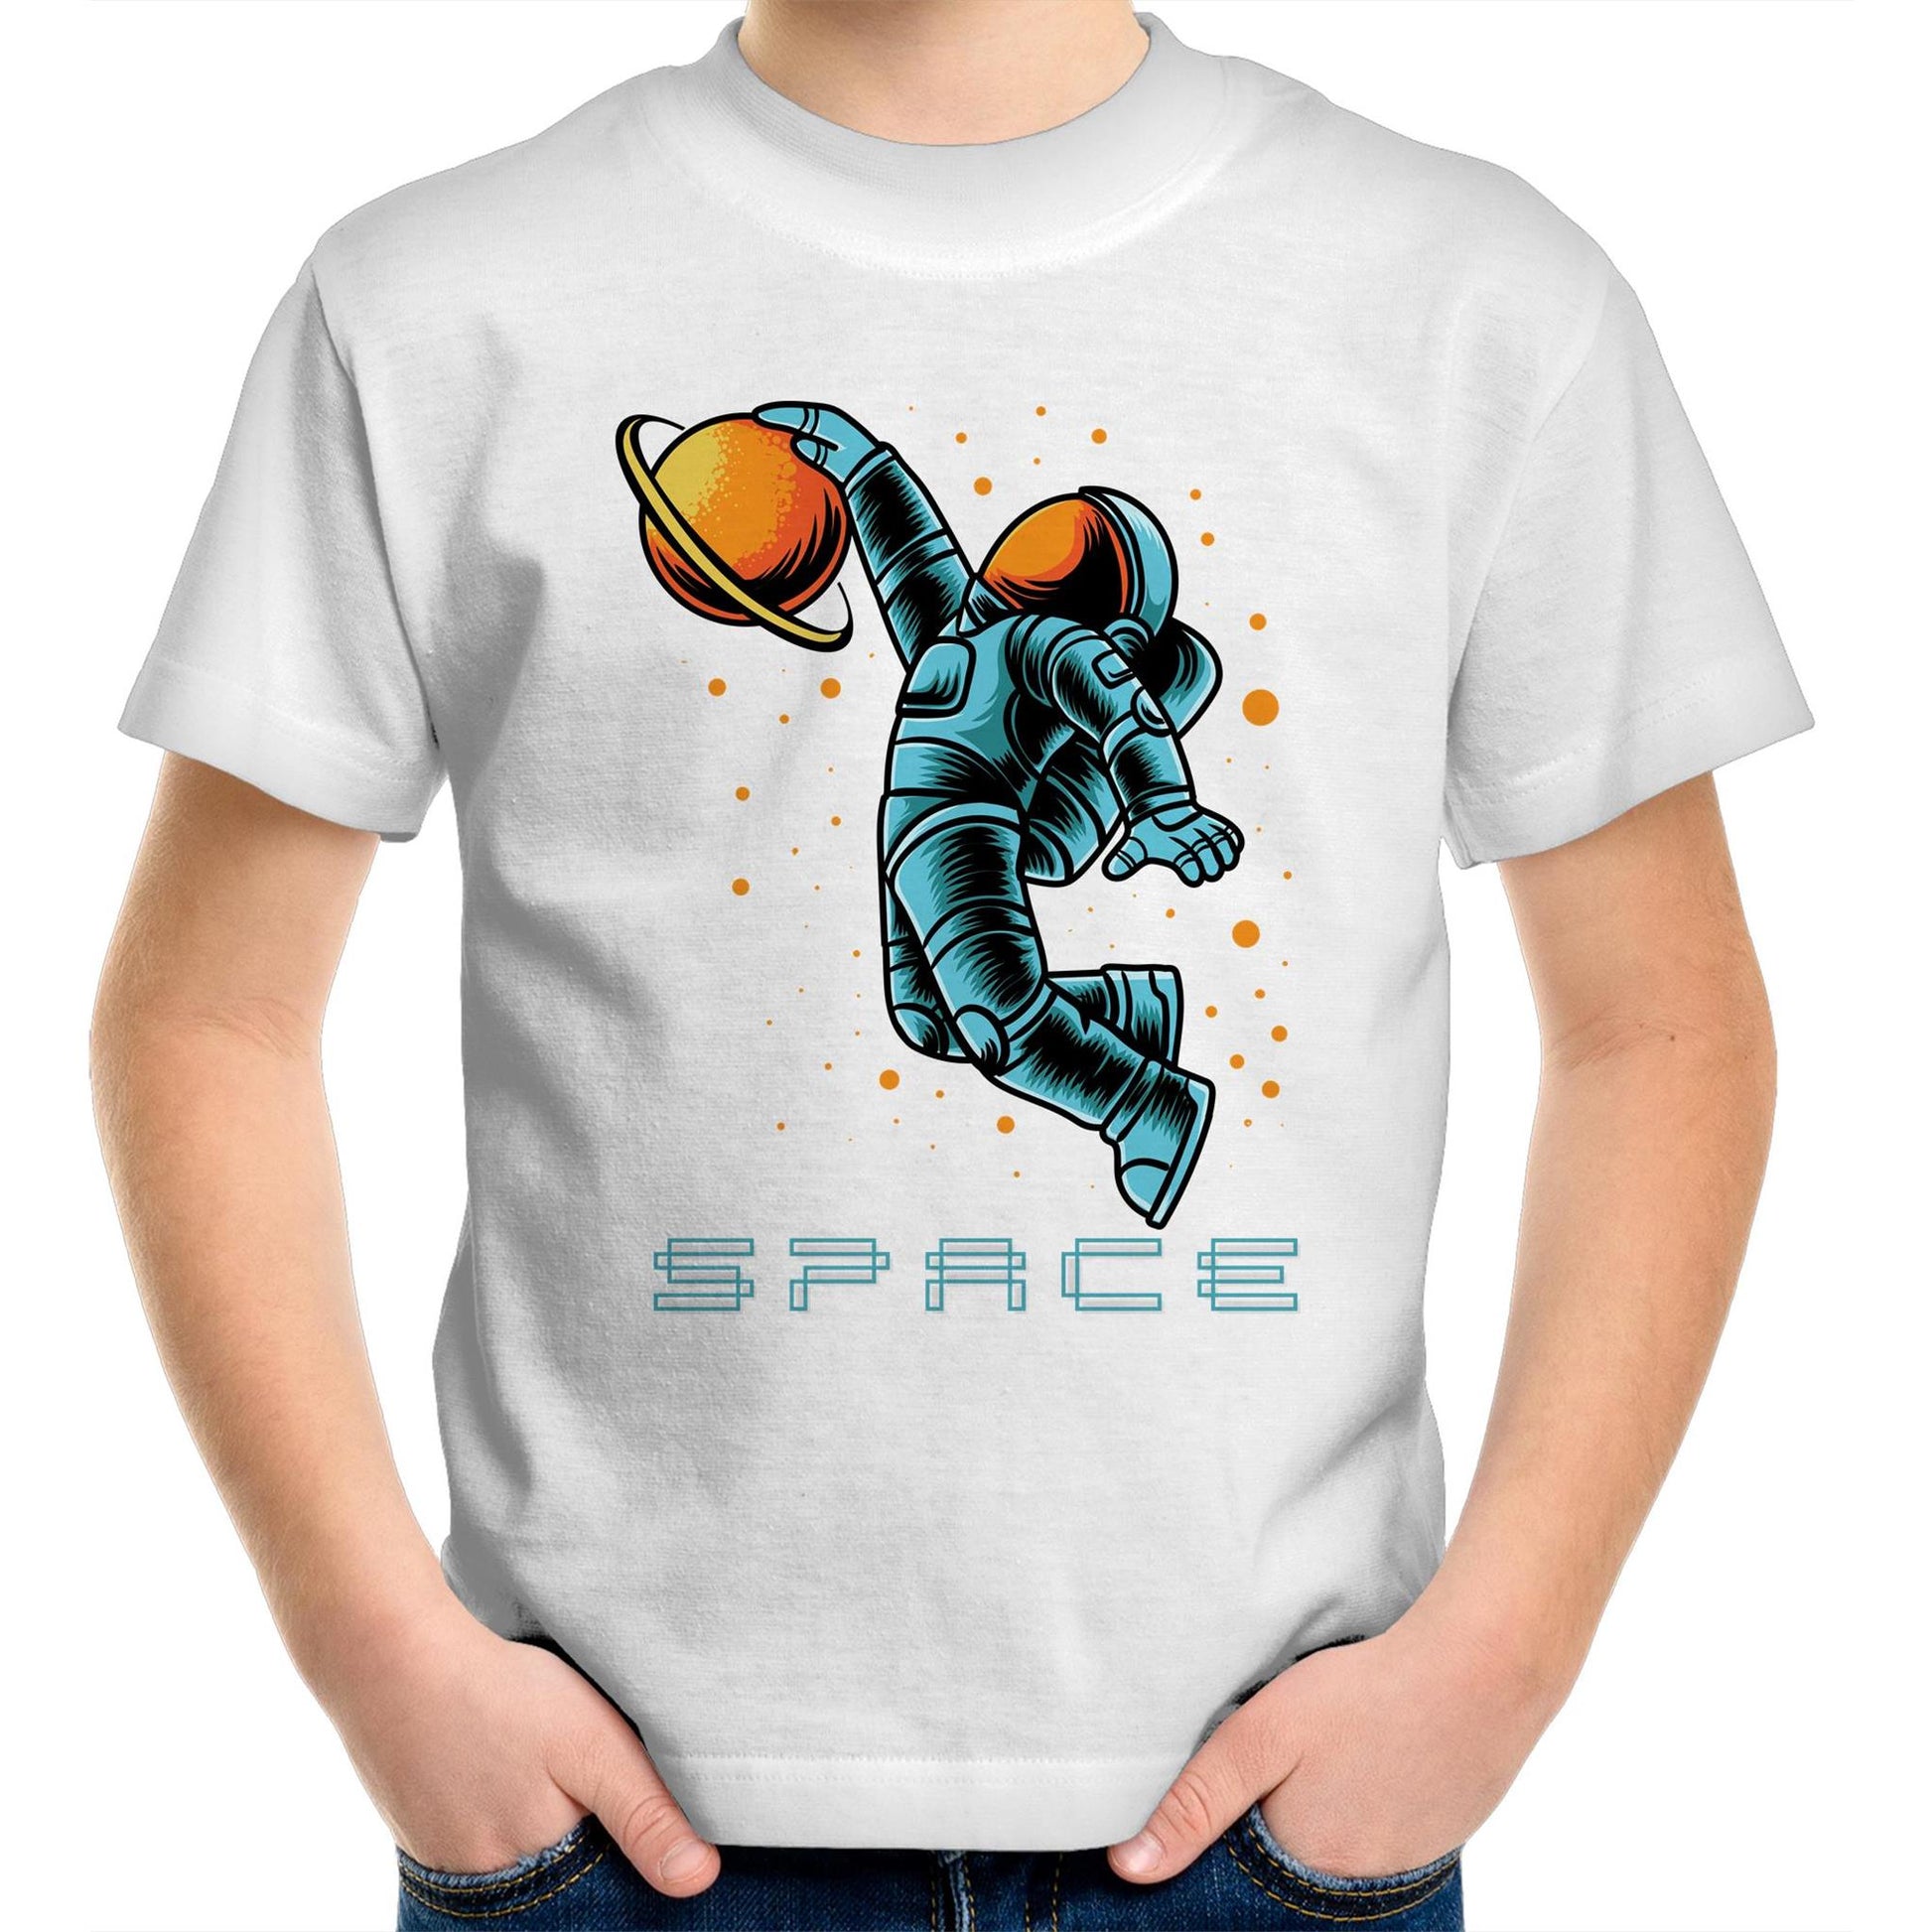 Astronaut Basketball - Kids Youth Crew T-Shirt White Kids Youth T-shirt Space